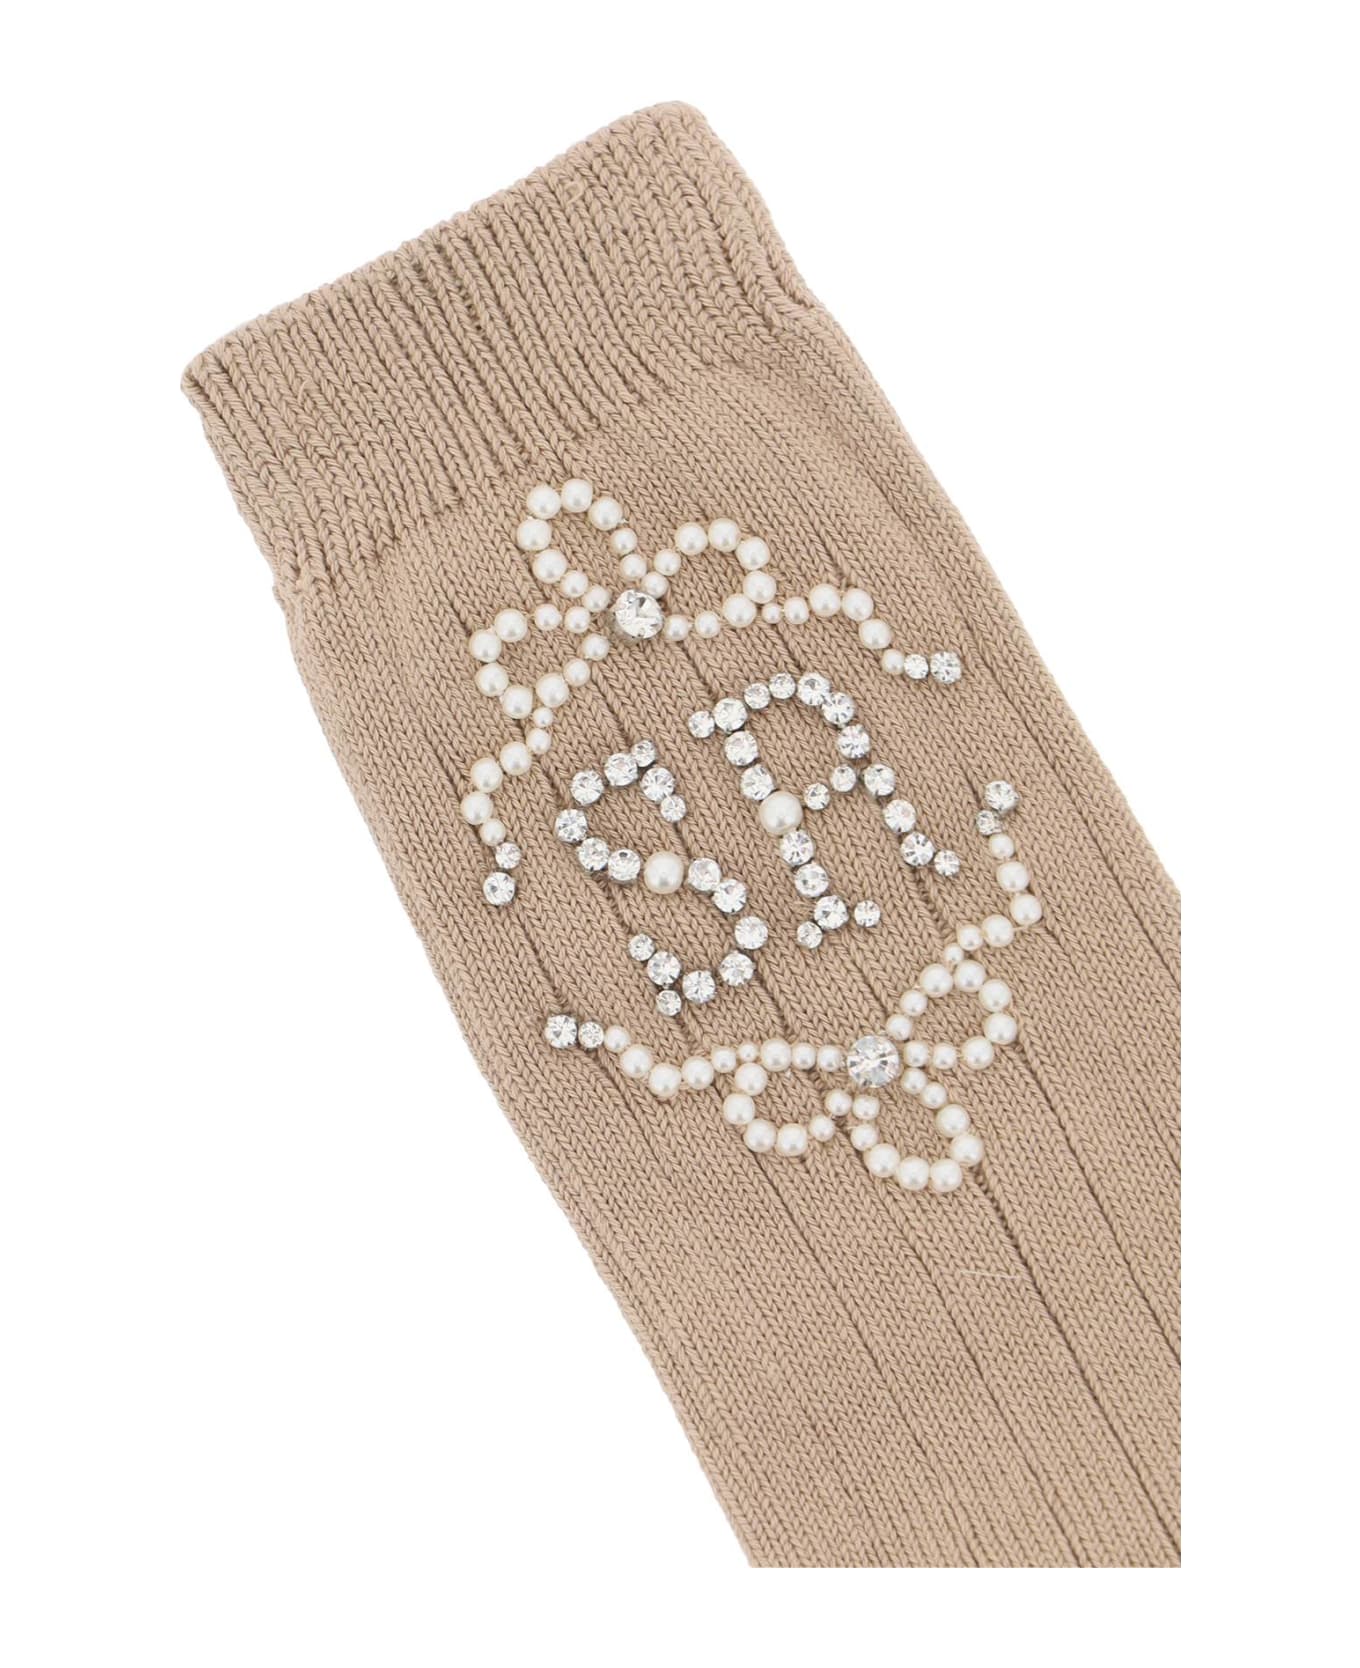 Simone Rocha Sr Socks With Pearls And Crystals - CAMEL PEARL CRYSTAL (Beige)